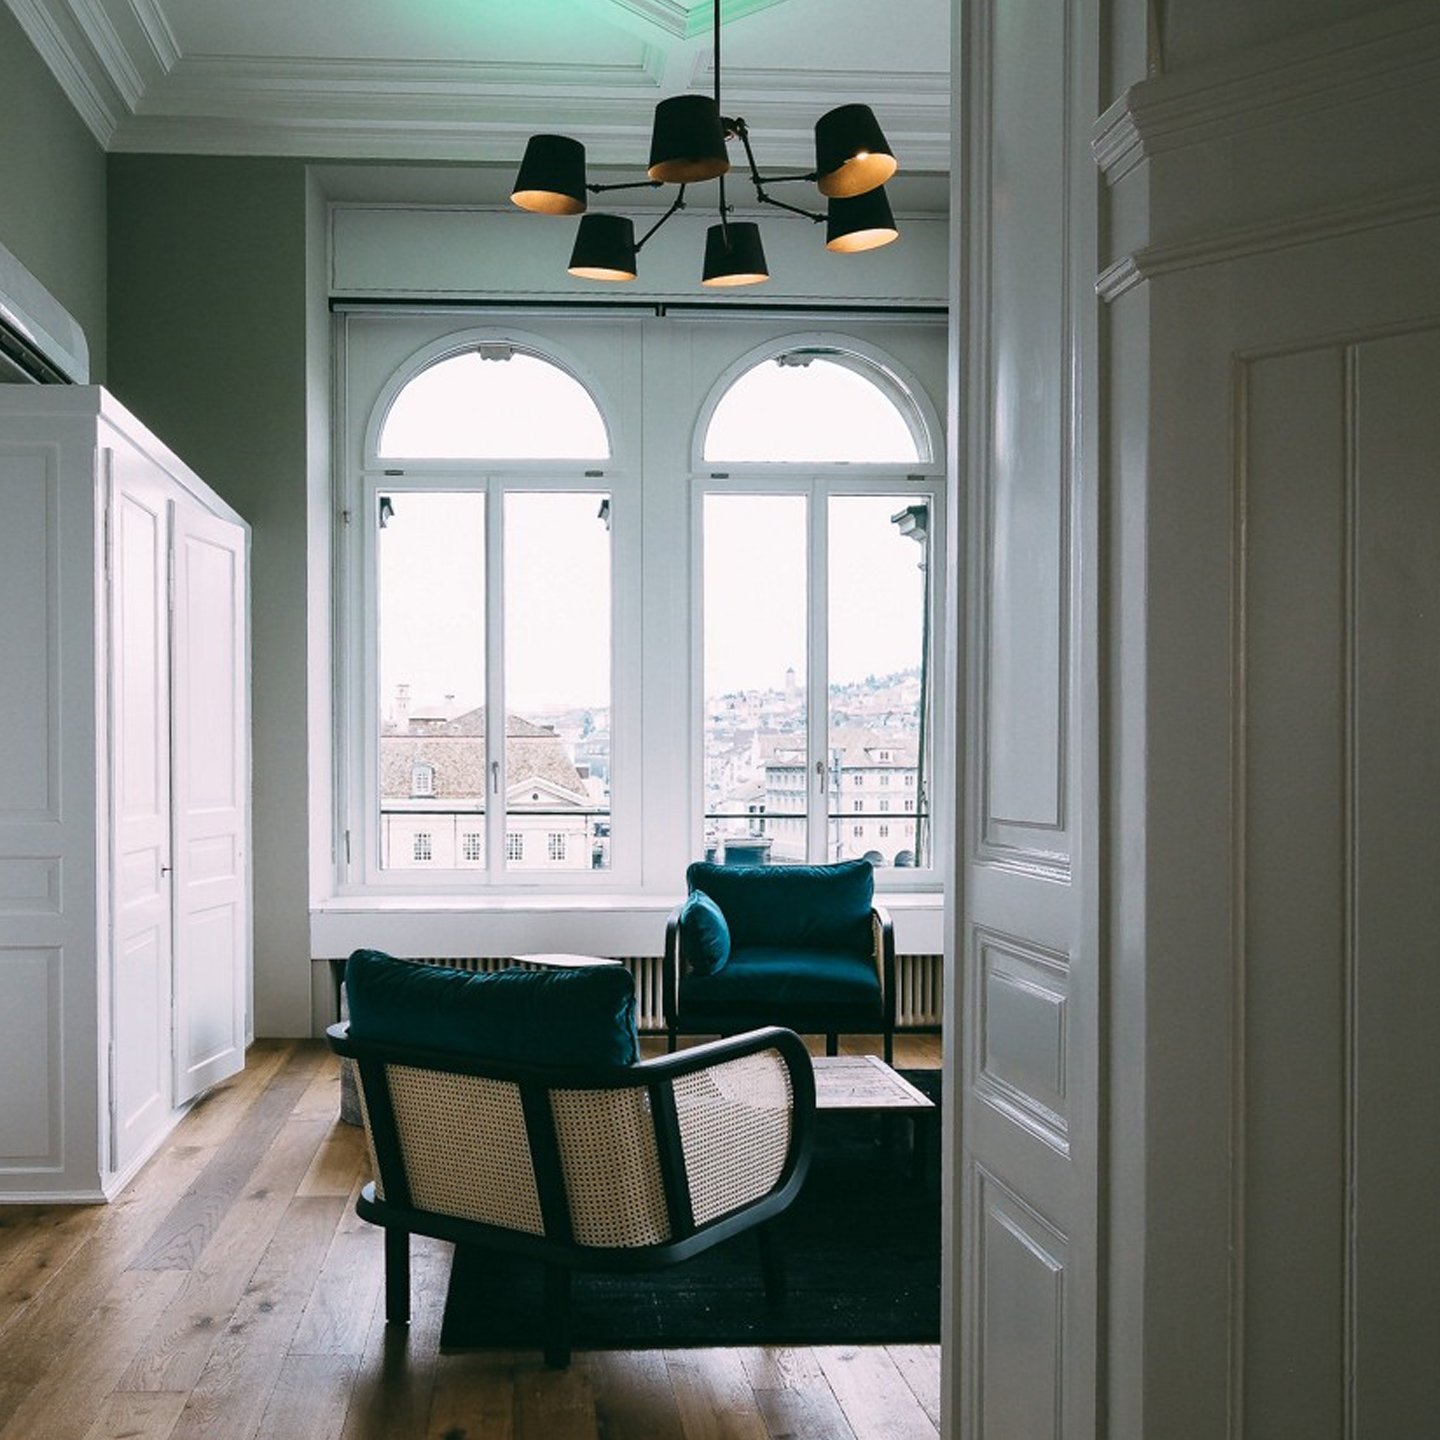 Haworth Buzzicane chairs in teal color in a living room by the window